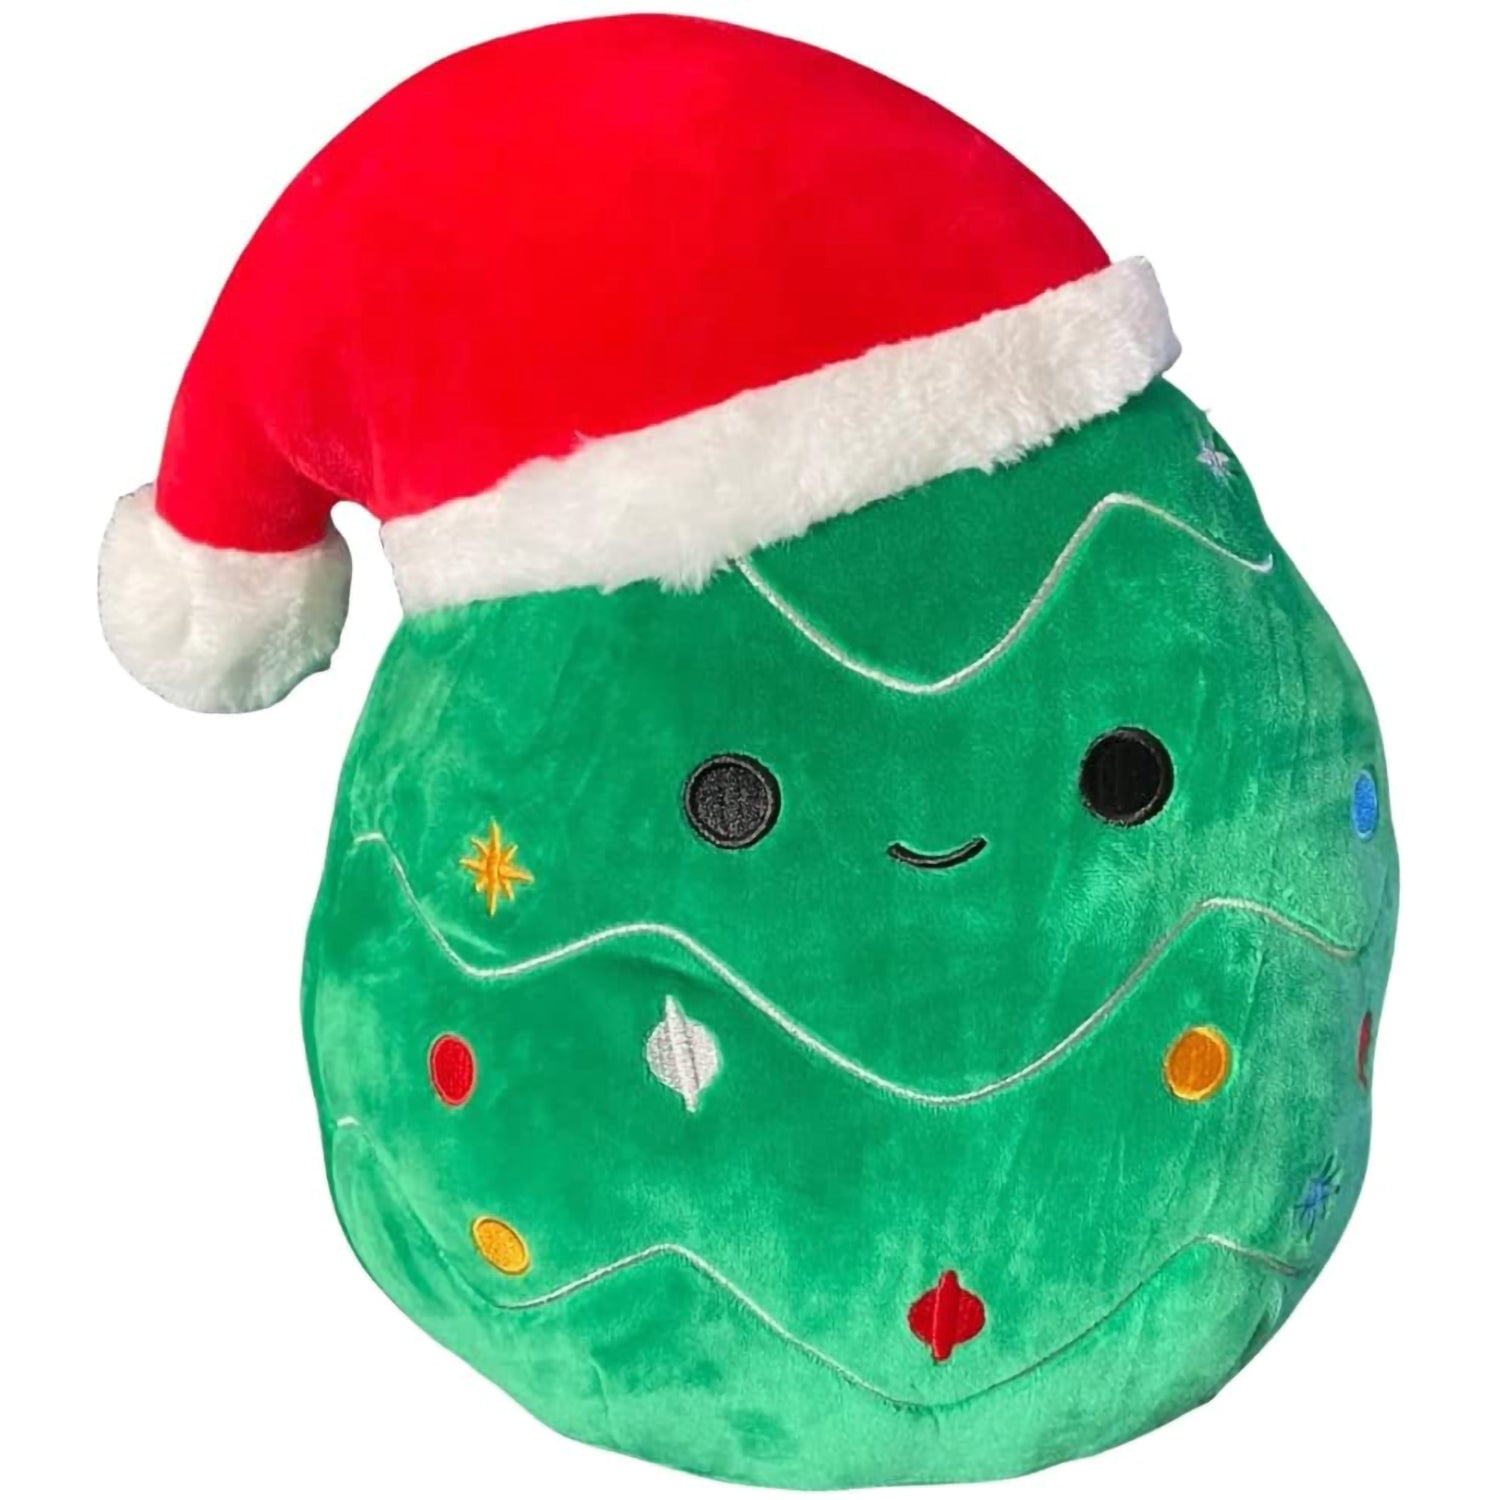  Squishmallows 4 Mini Plush Christmas Tree Ornaments, 8-Pack -  Official Kellytoy Holiday Set - Includes Cam The Cat, Darla The Fawn &  More! Squishy & Soft Stuffed Animal Toy : Toys